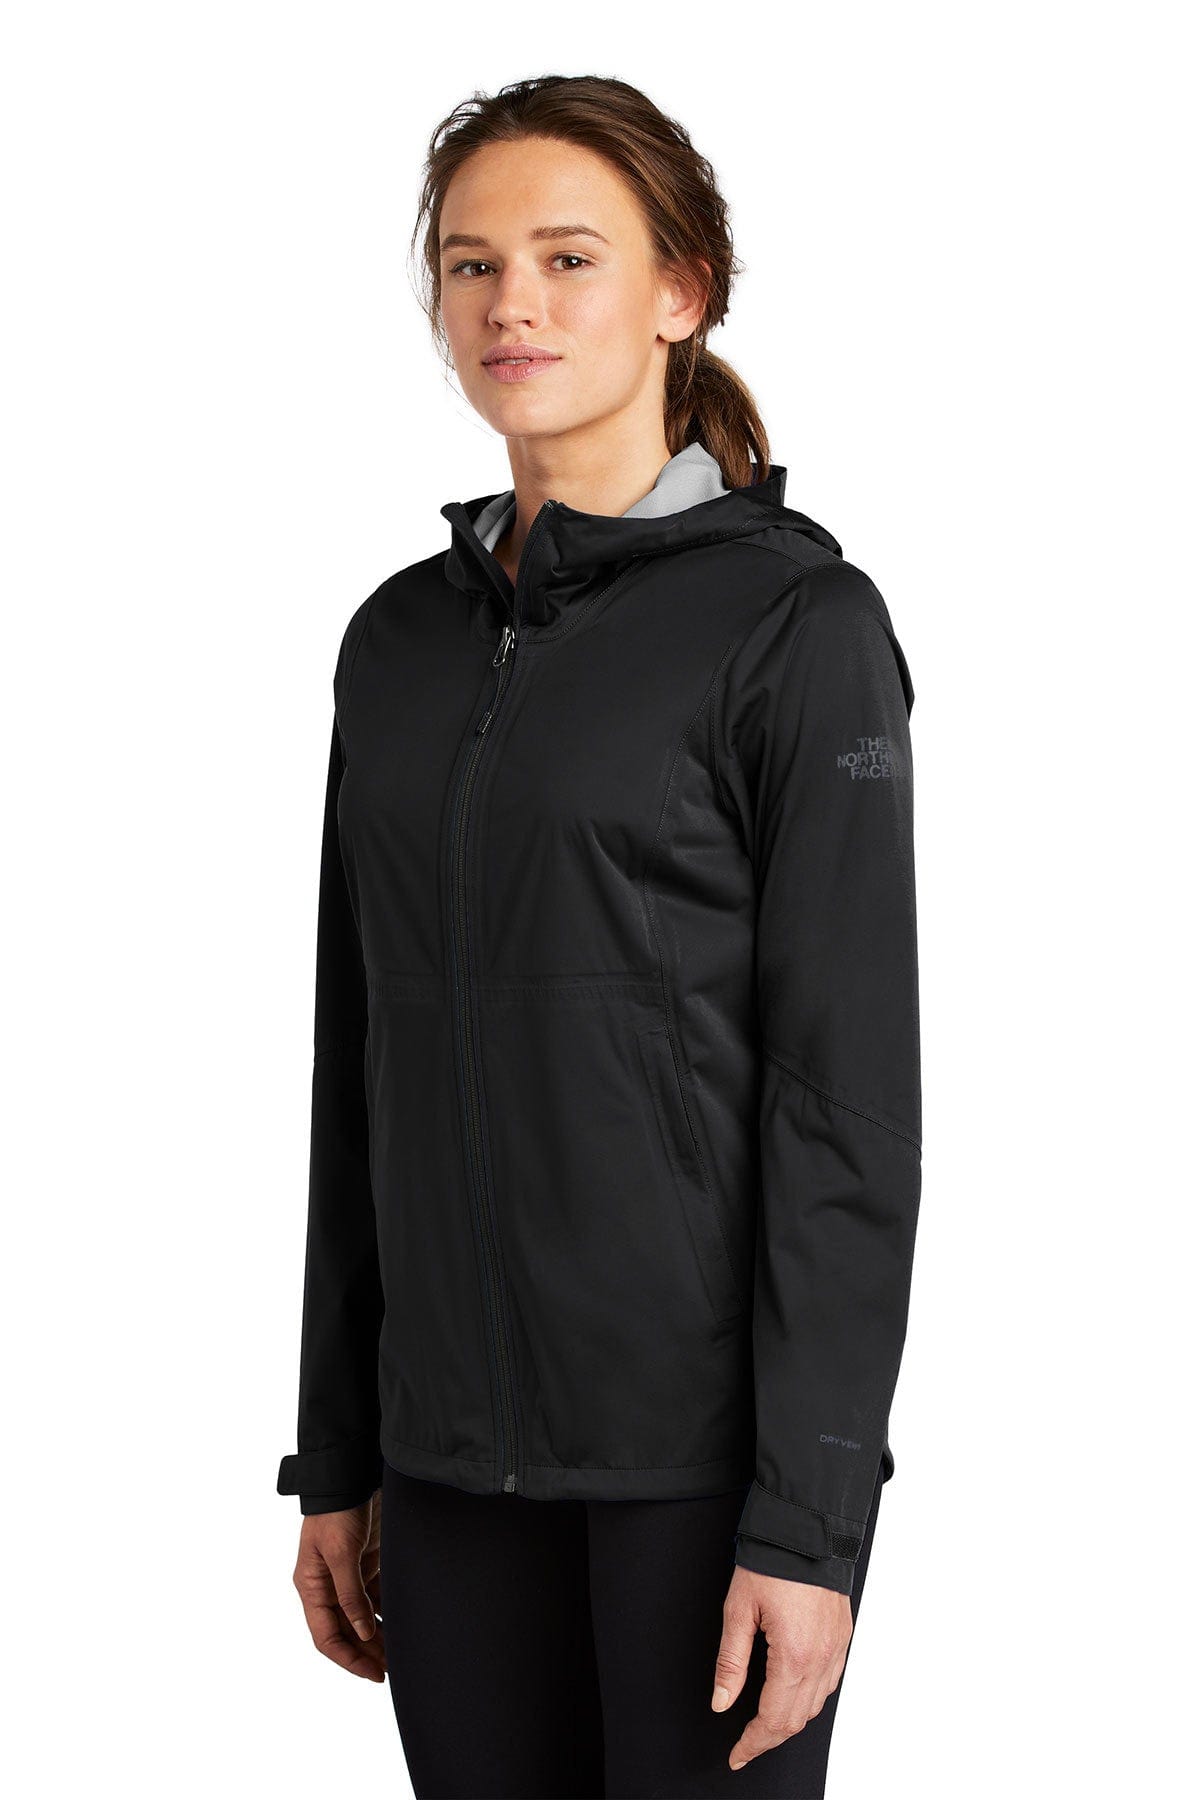 Custom The North Face Ladies DryVent Stretch Jacket